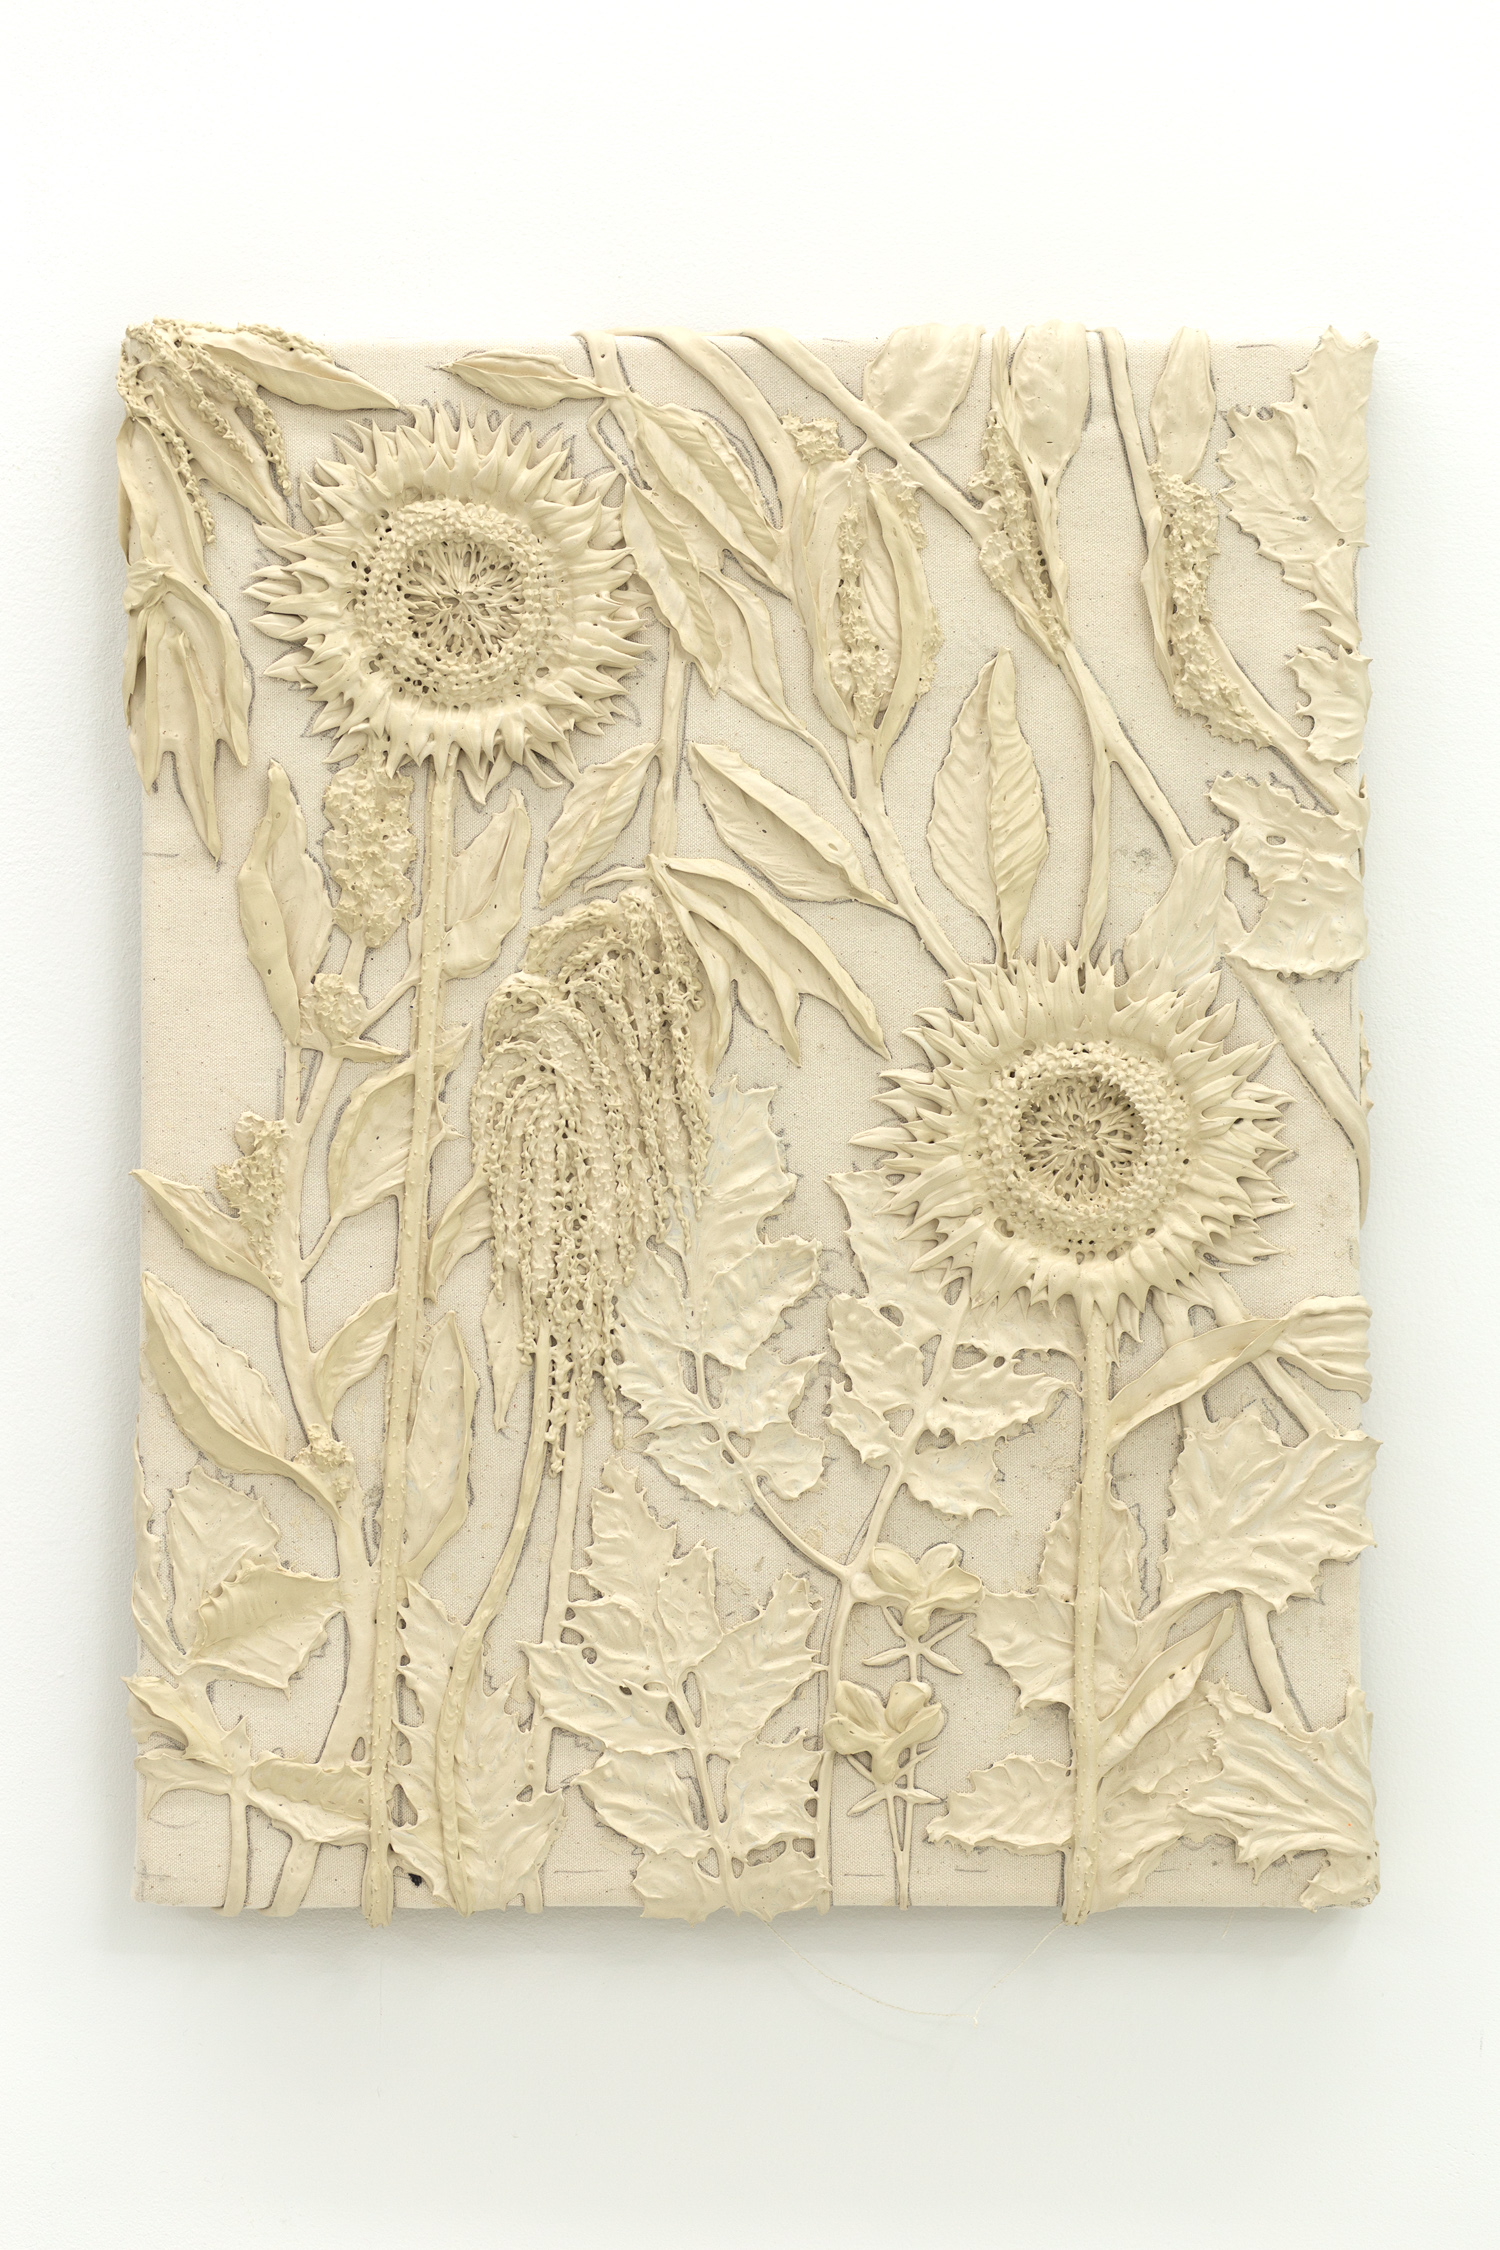 Tan monotone plastic painting of two sunflowers and assorted other plants